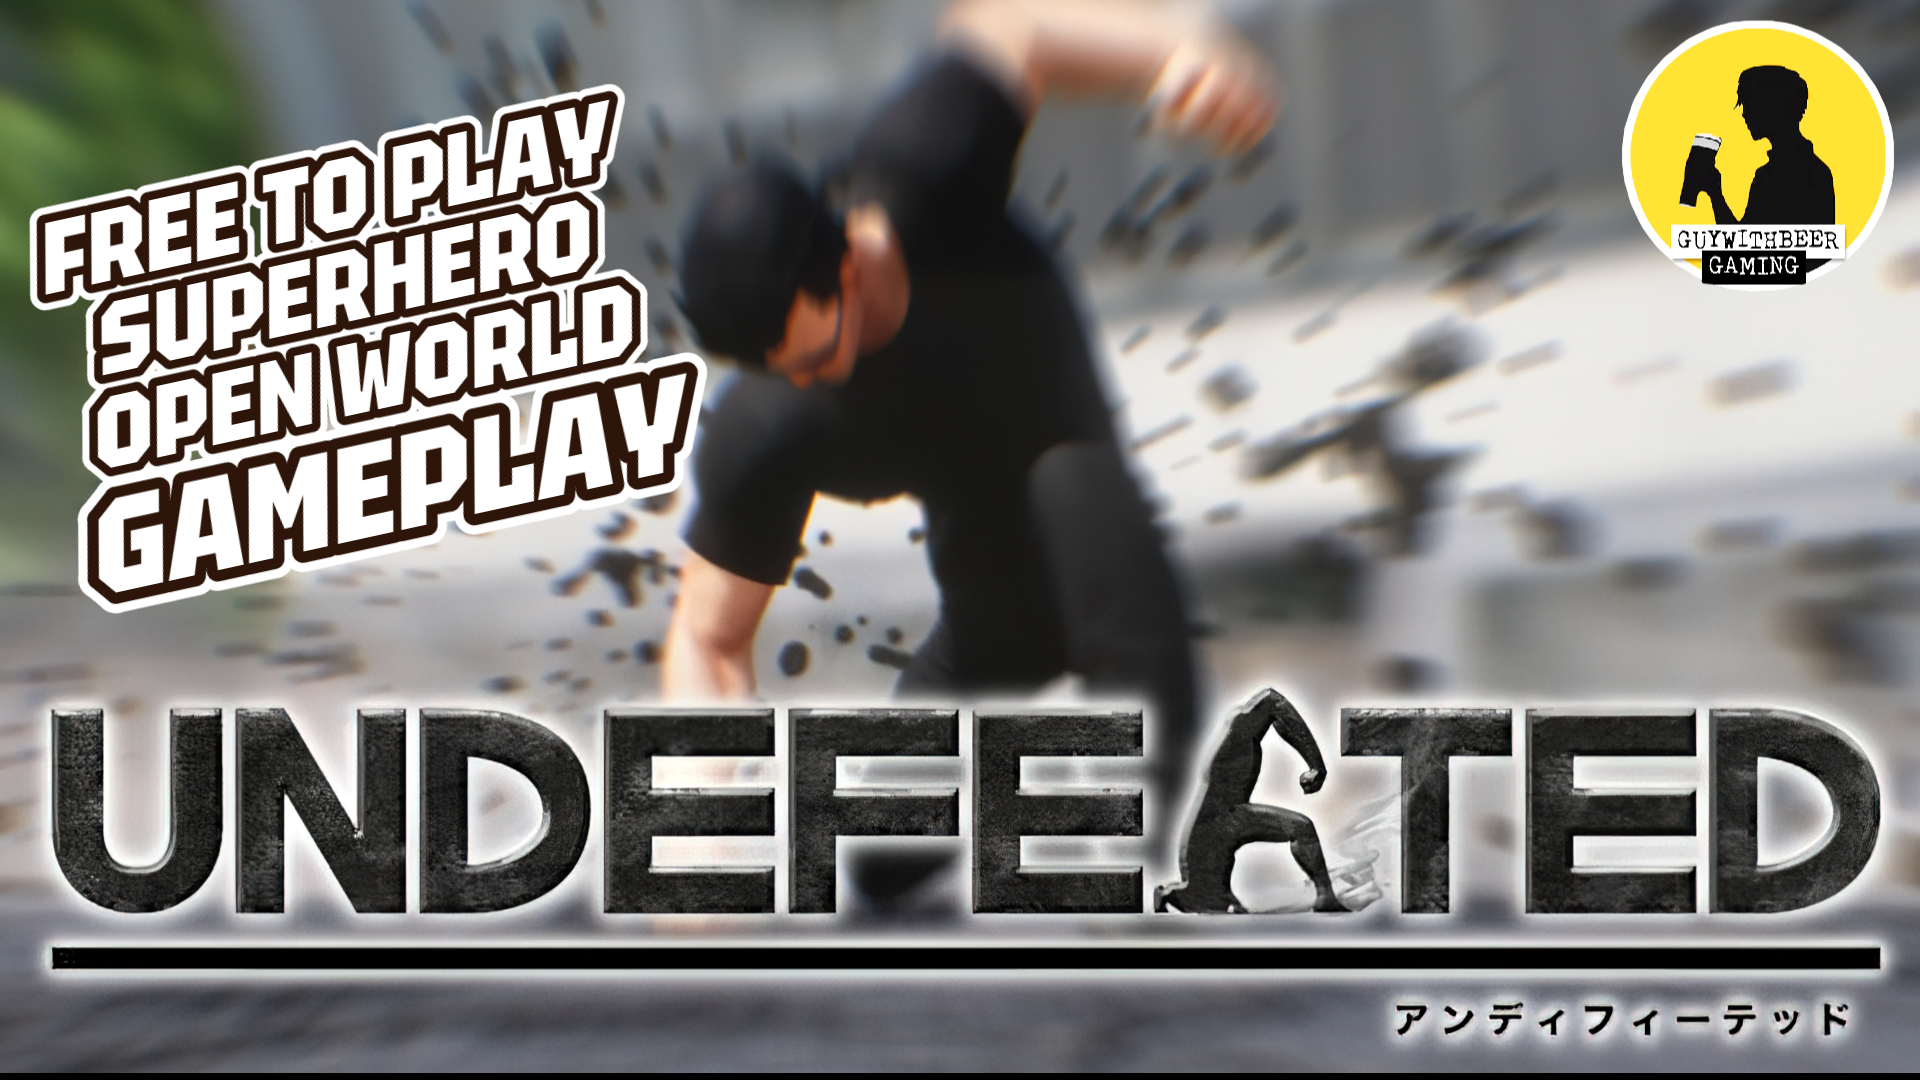 UNDEFEATED | GAMEPLAY #undefeated #gameplay #freetoplay